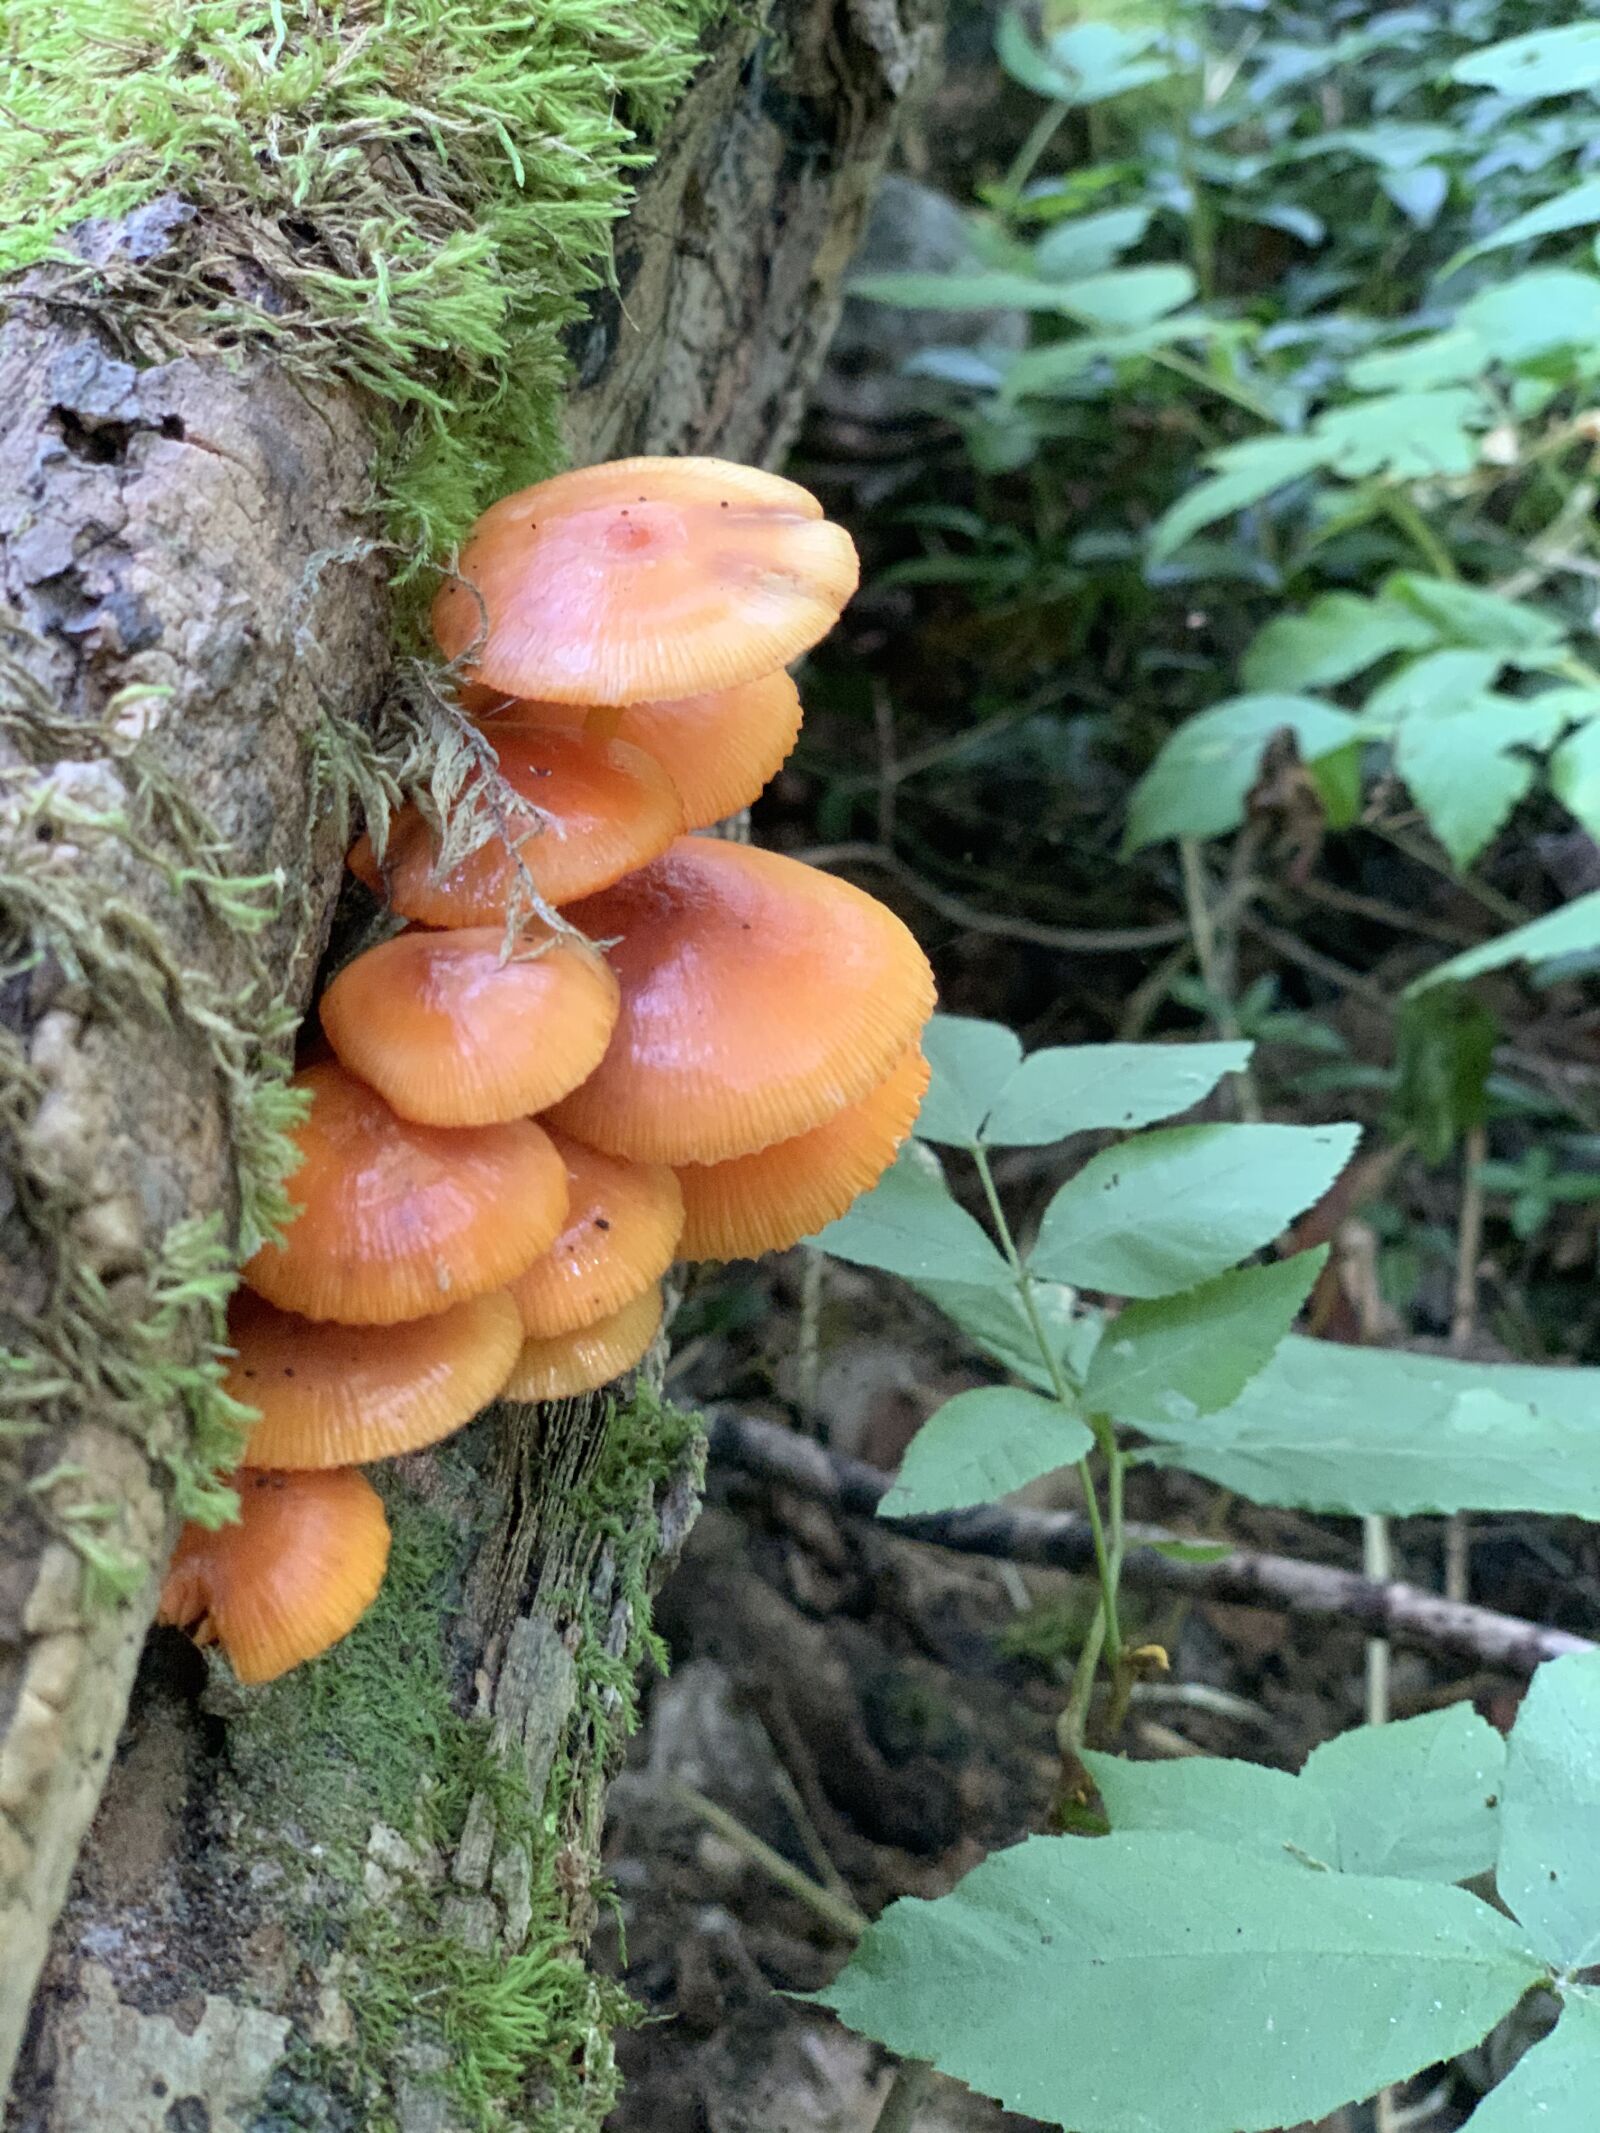 Apple iPhone XS + iPhone XS back dual camera 6mm f/2.4 sample photo. Mushrooms, forest, nature photography